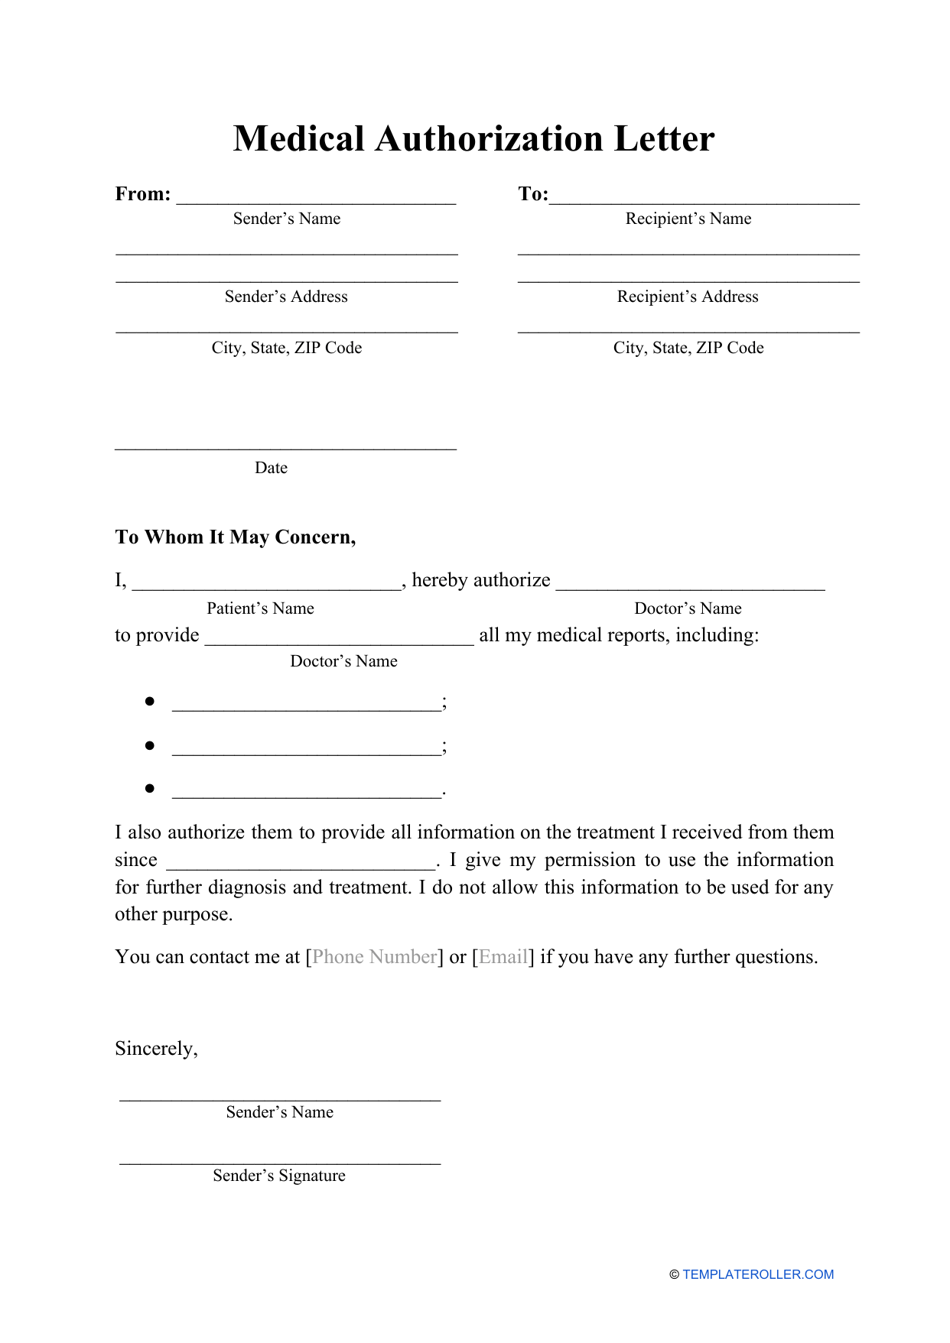 Medical Authorization Letter Template Download Printable Pdf Templateroller 8409